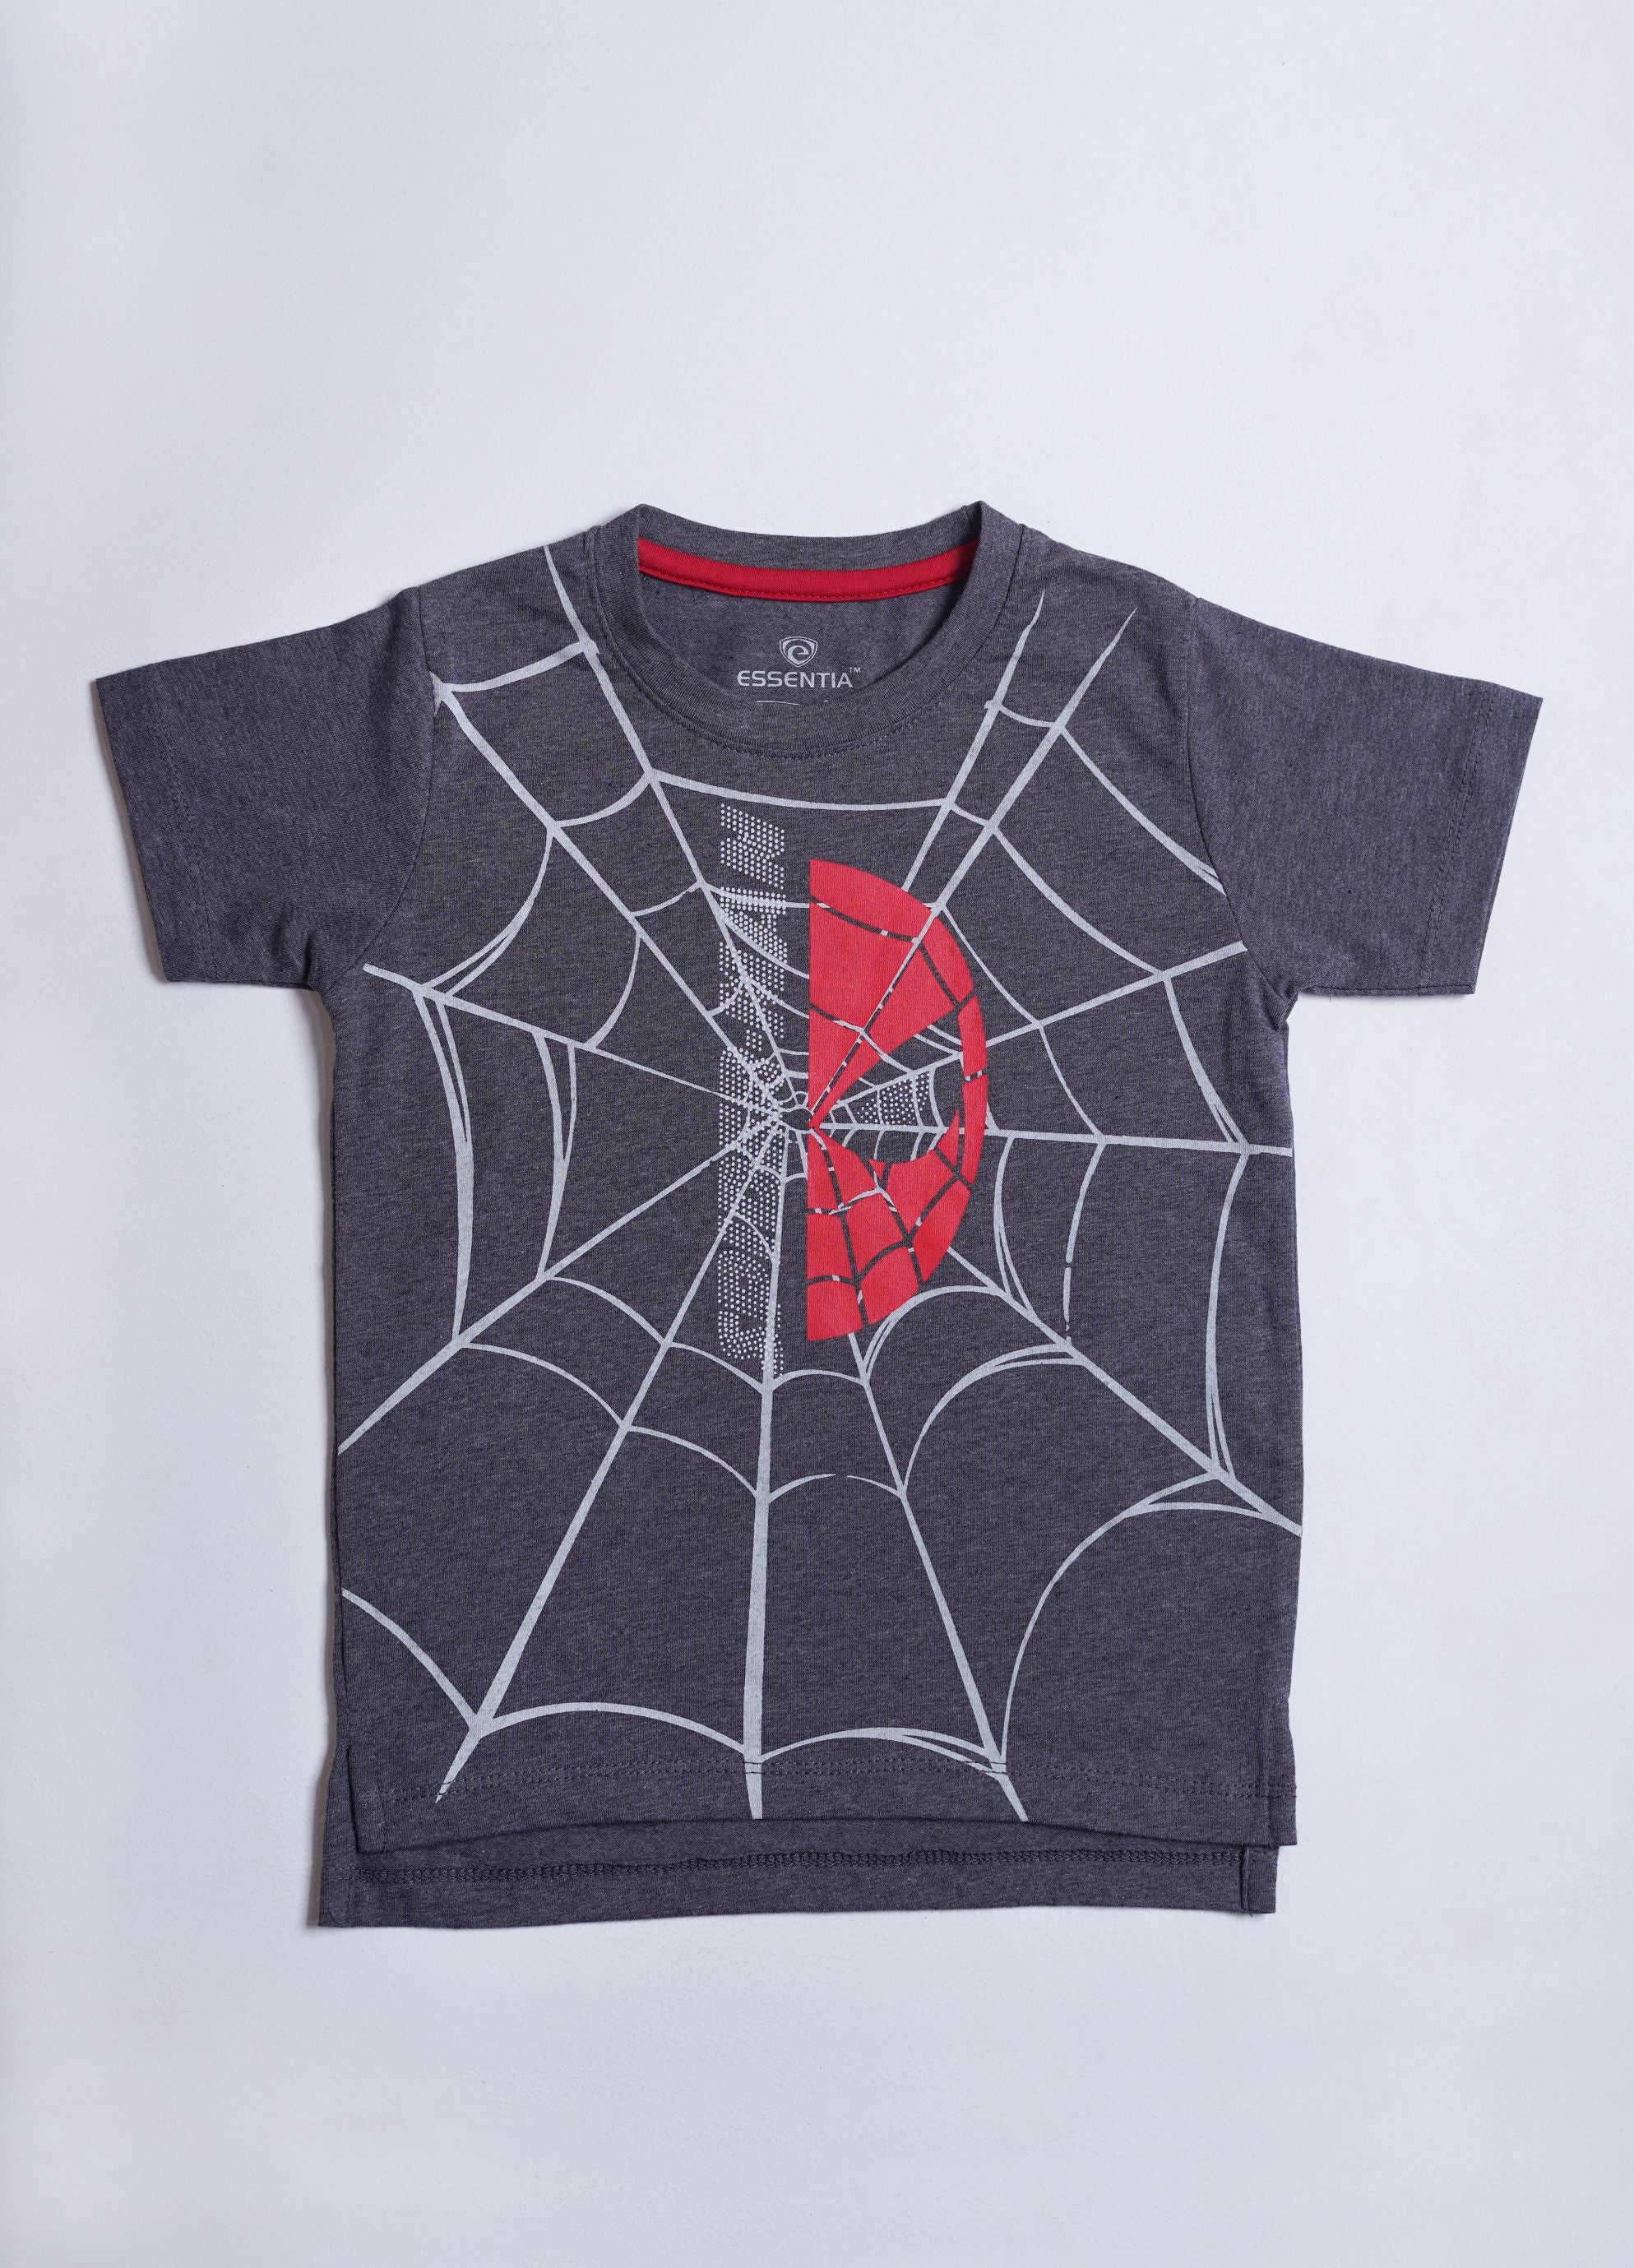 Spider-Man Logo Printed Tee for Boys